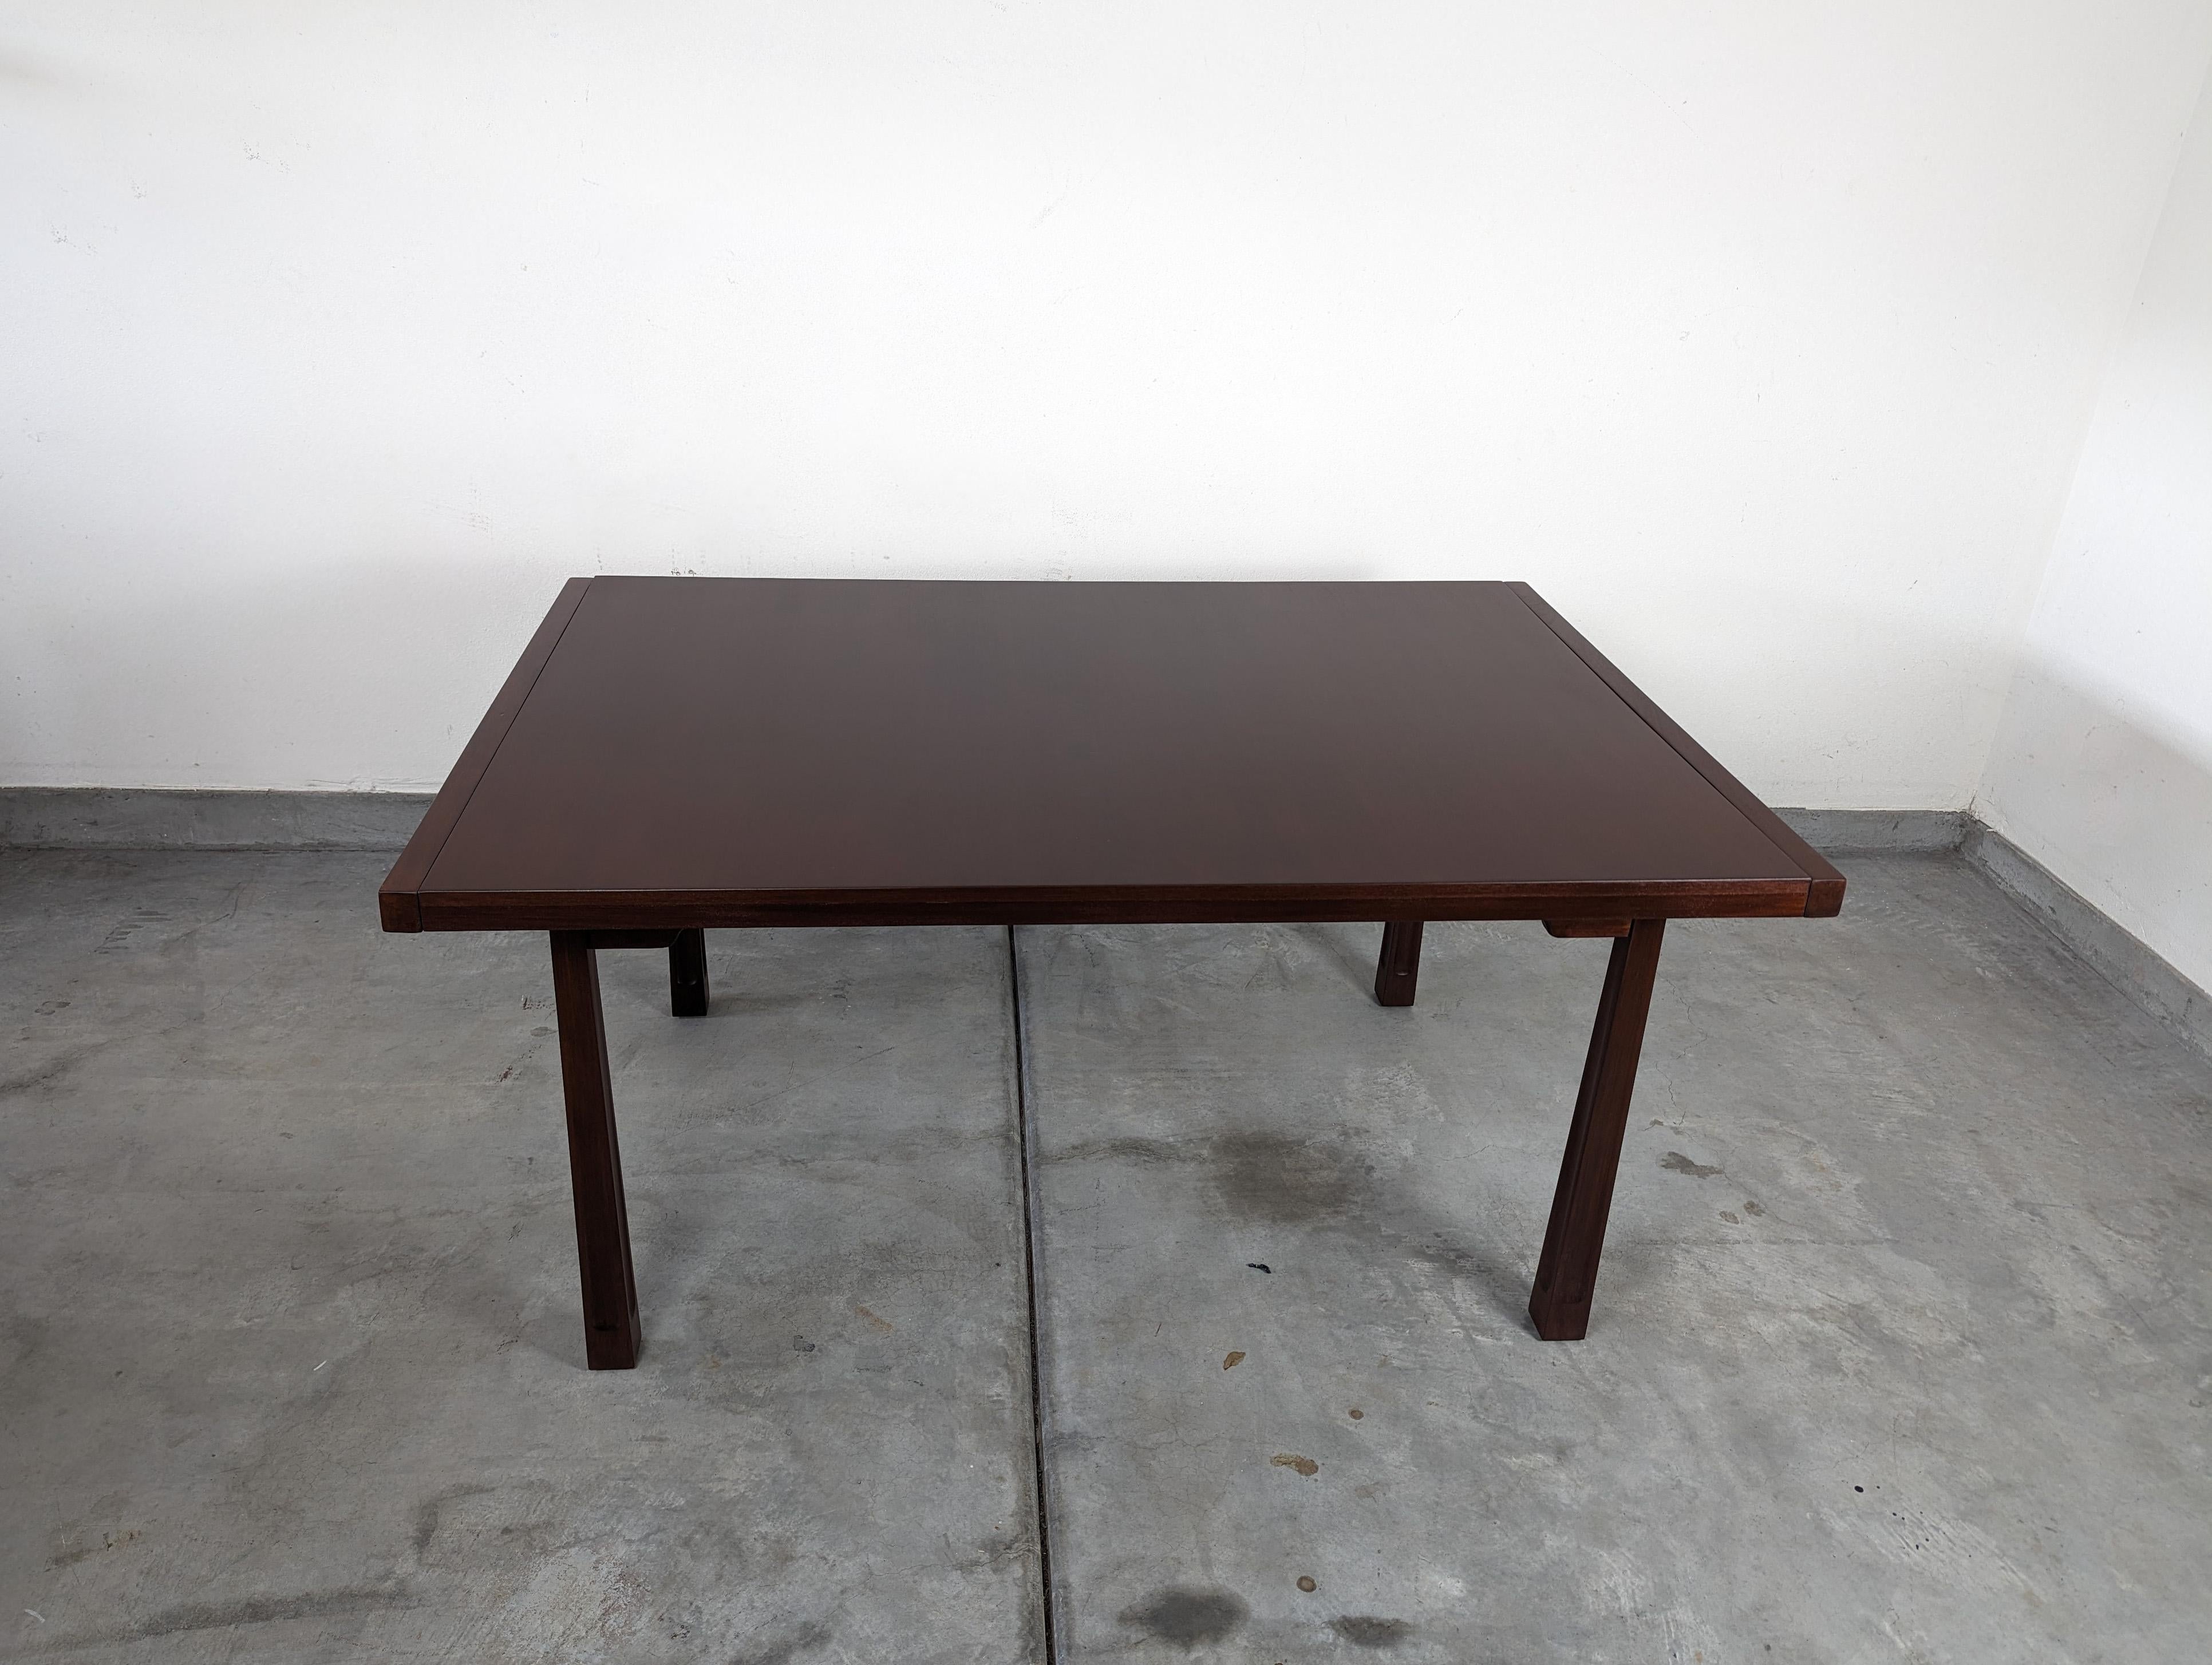 Experience a glimpse of history while dining with this stunning mid-century mahogany dining table designed by the renowned designer Edmond J. Spence and manufactured by Industria Mueblera of Mexico in the 1950s. This table showcases the perfect